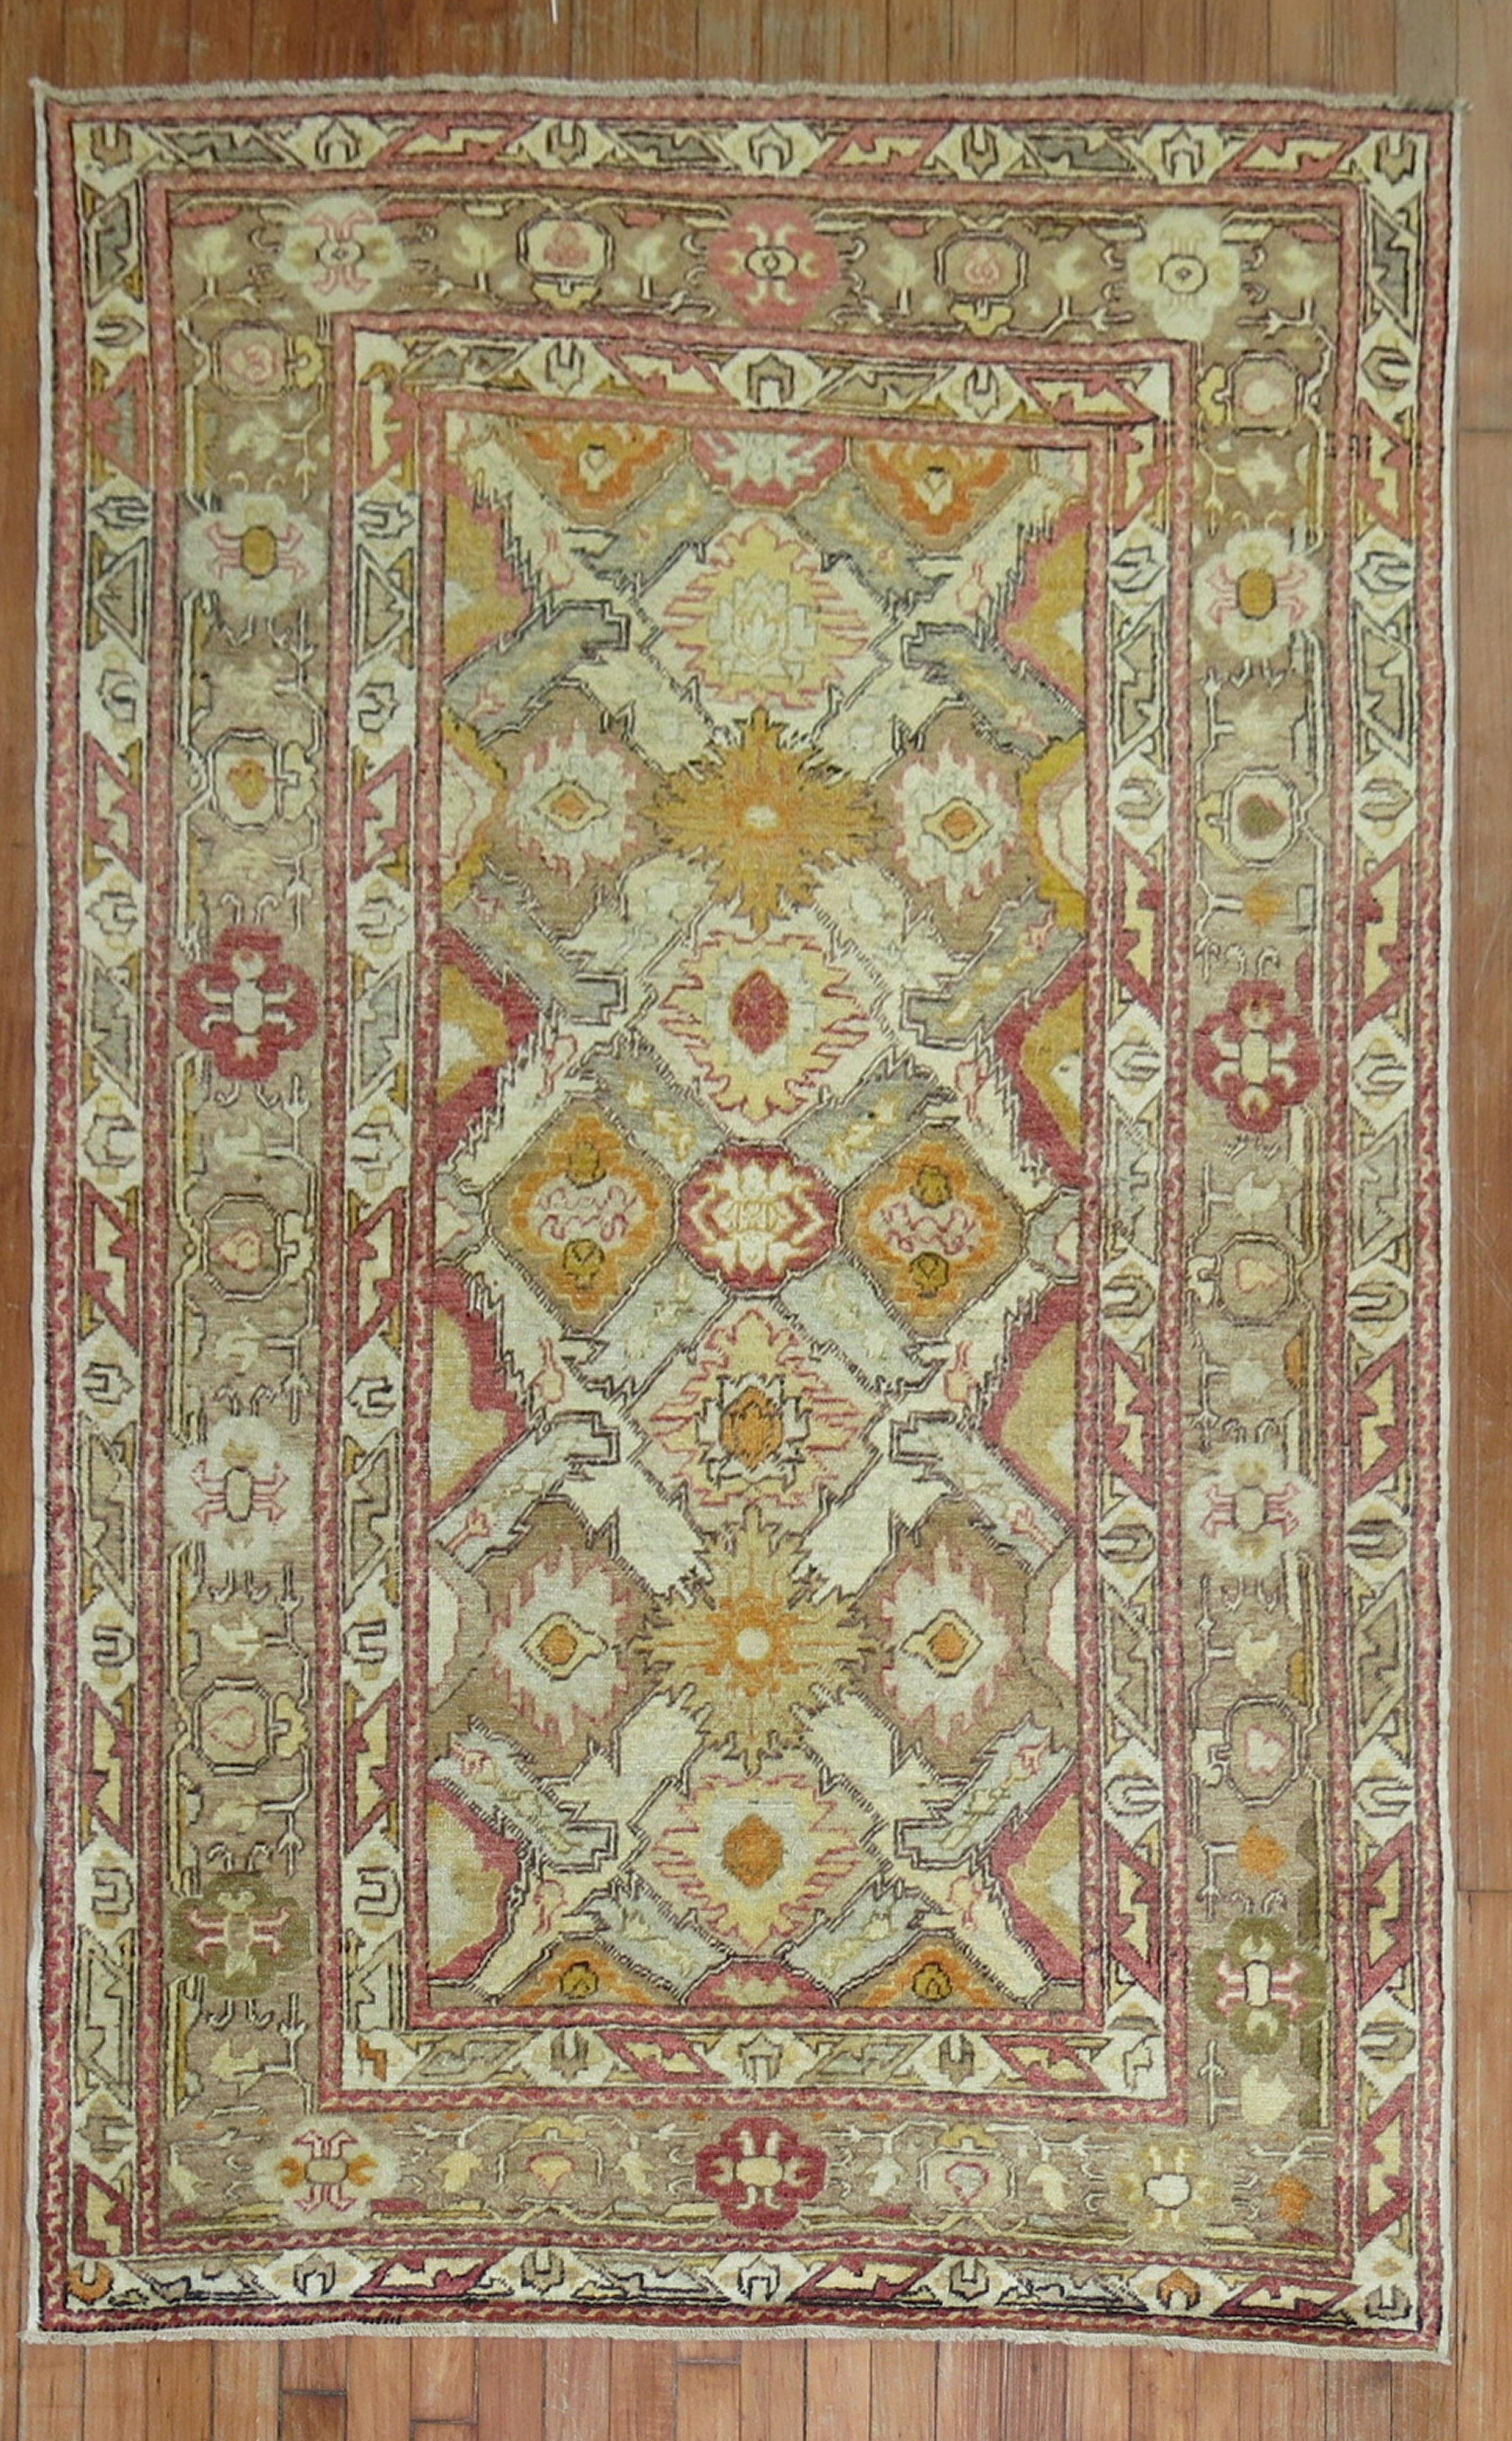 An early 20th-century Turkish Sivas accent size Carpet.

Measures: 4'2'' x 6'3''.